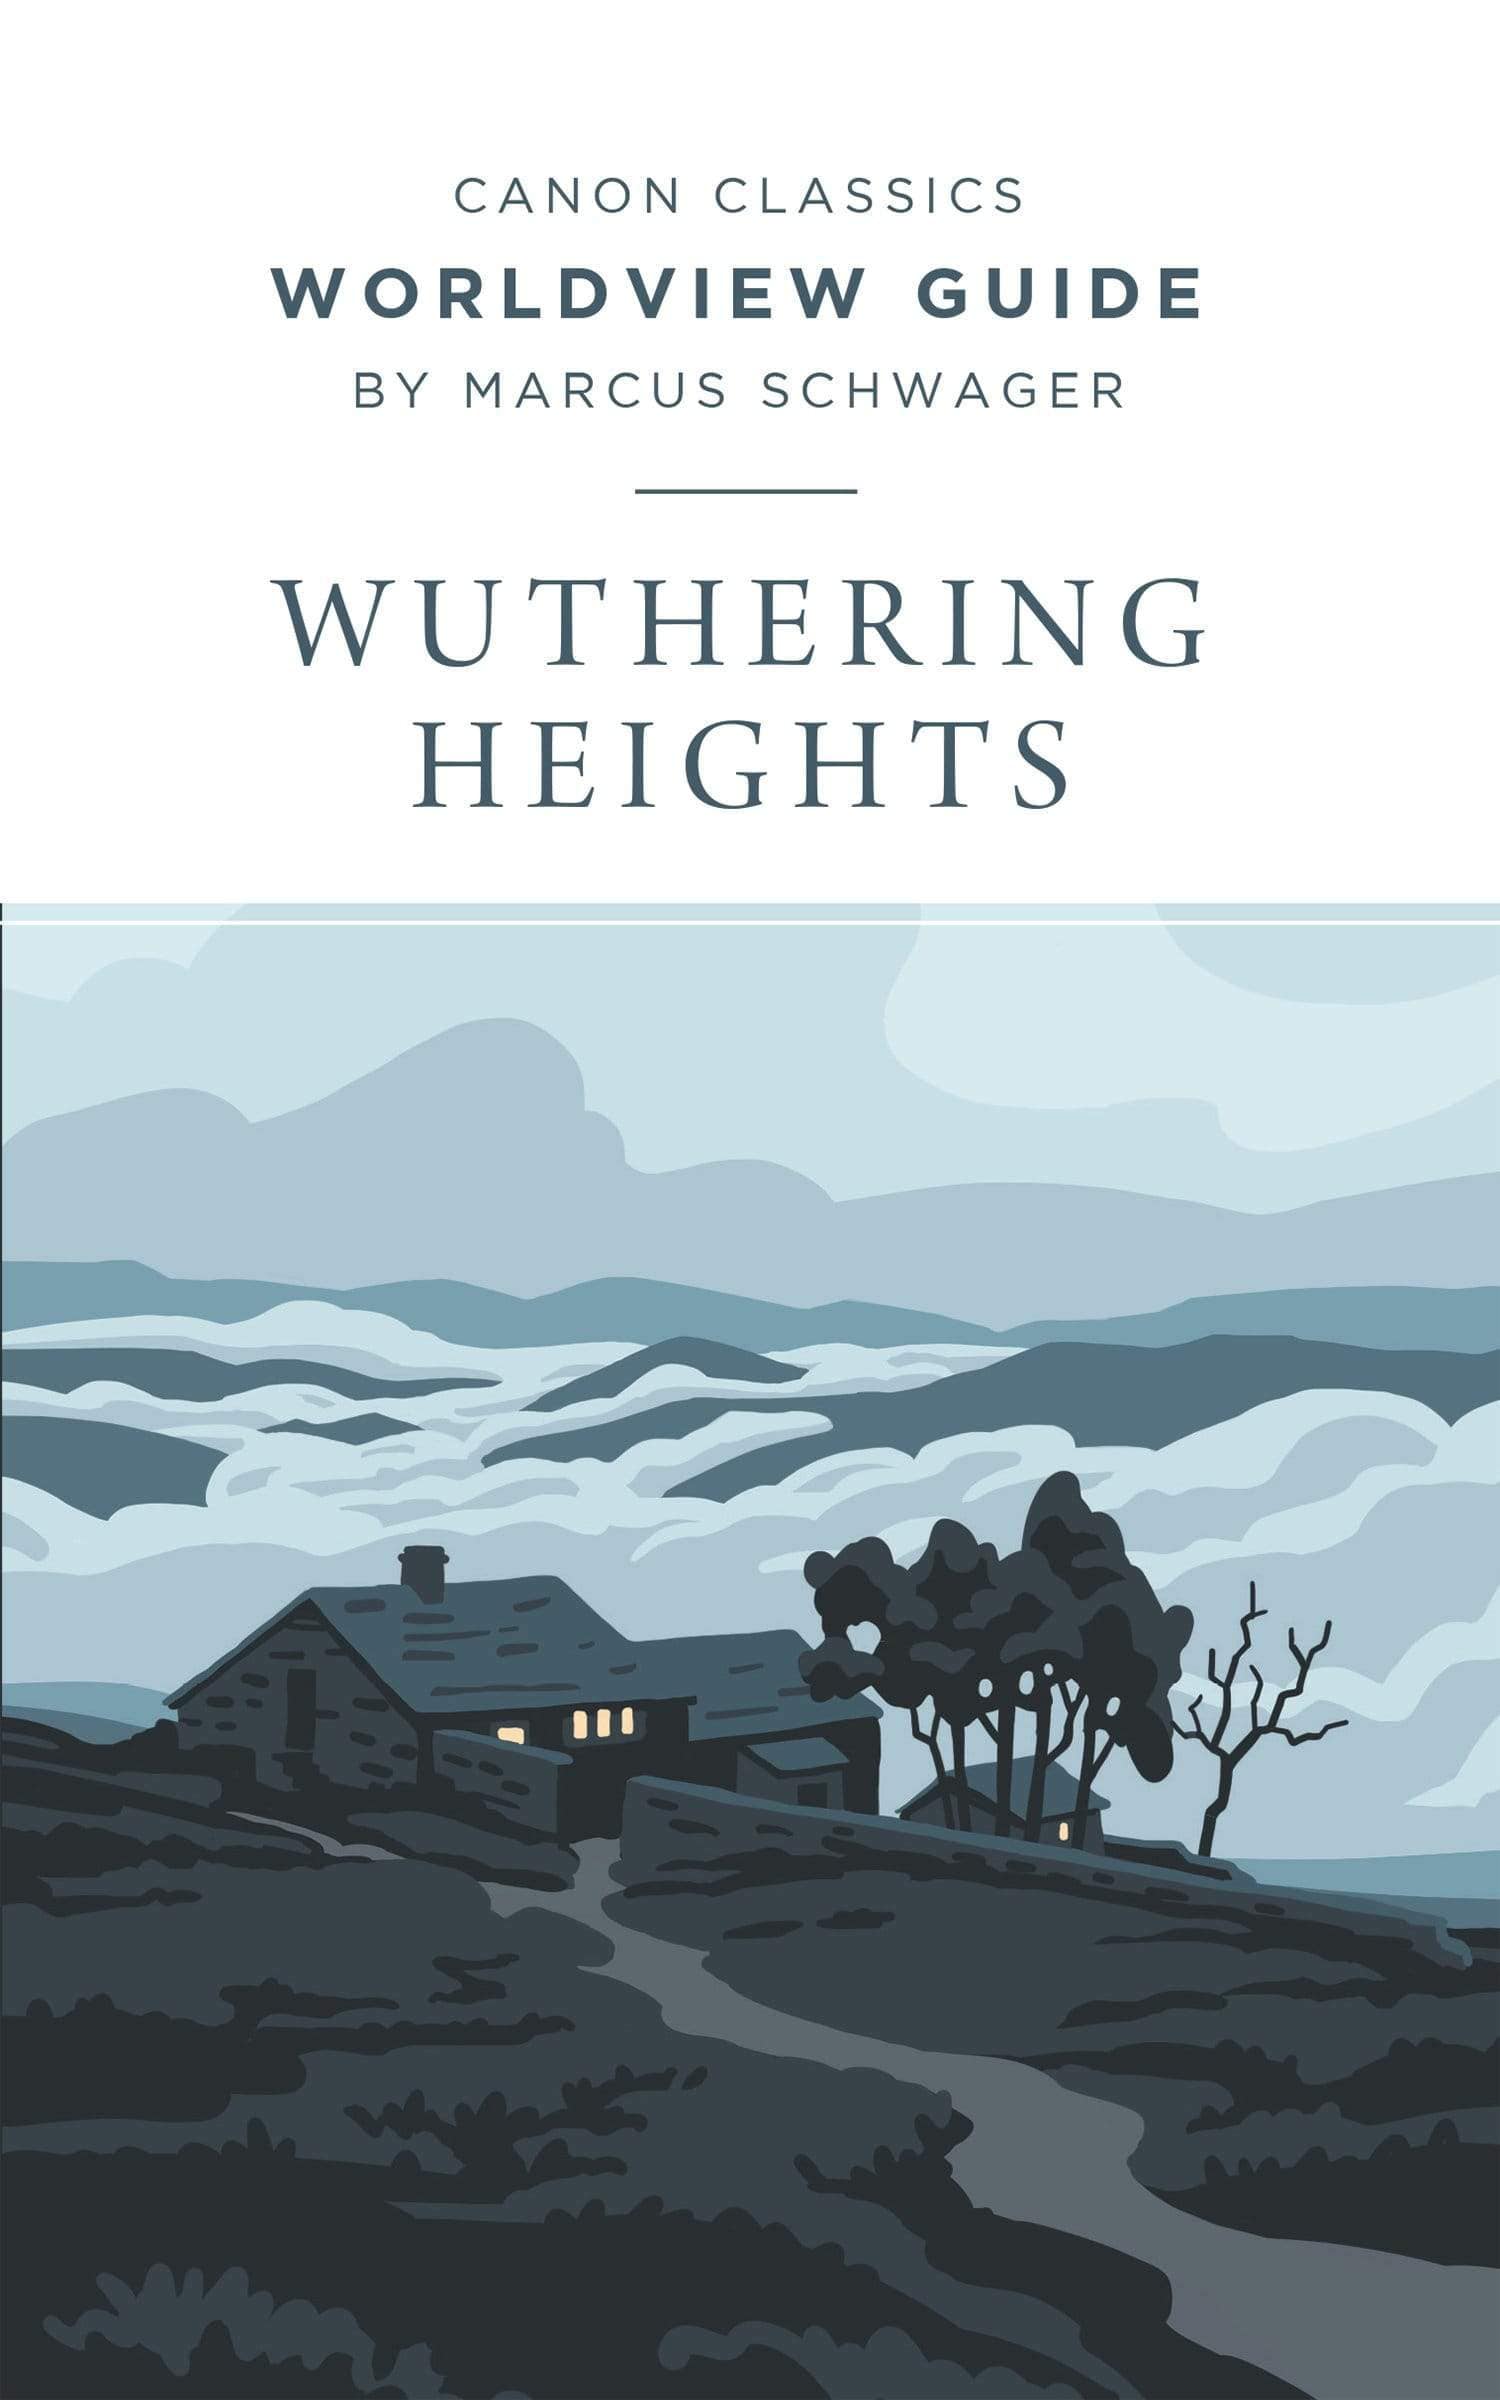 WUTHERING HEIGHTS – Reading Group Choices